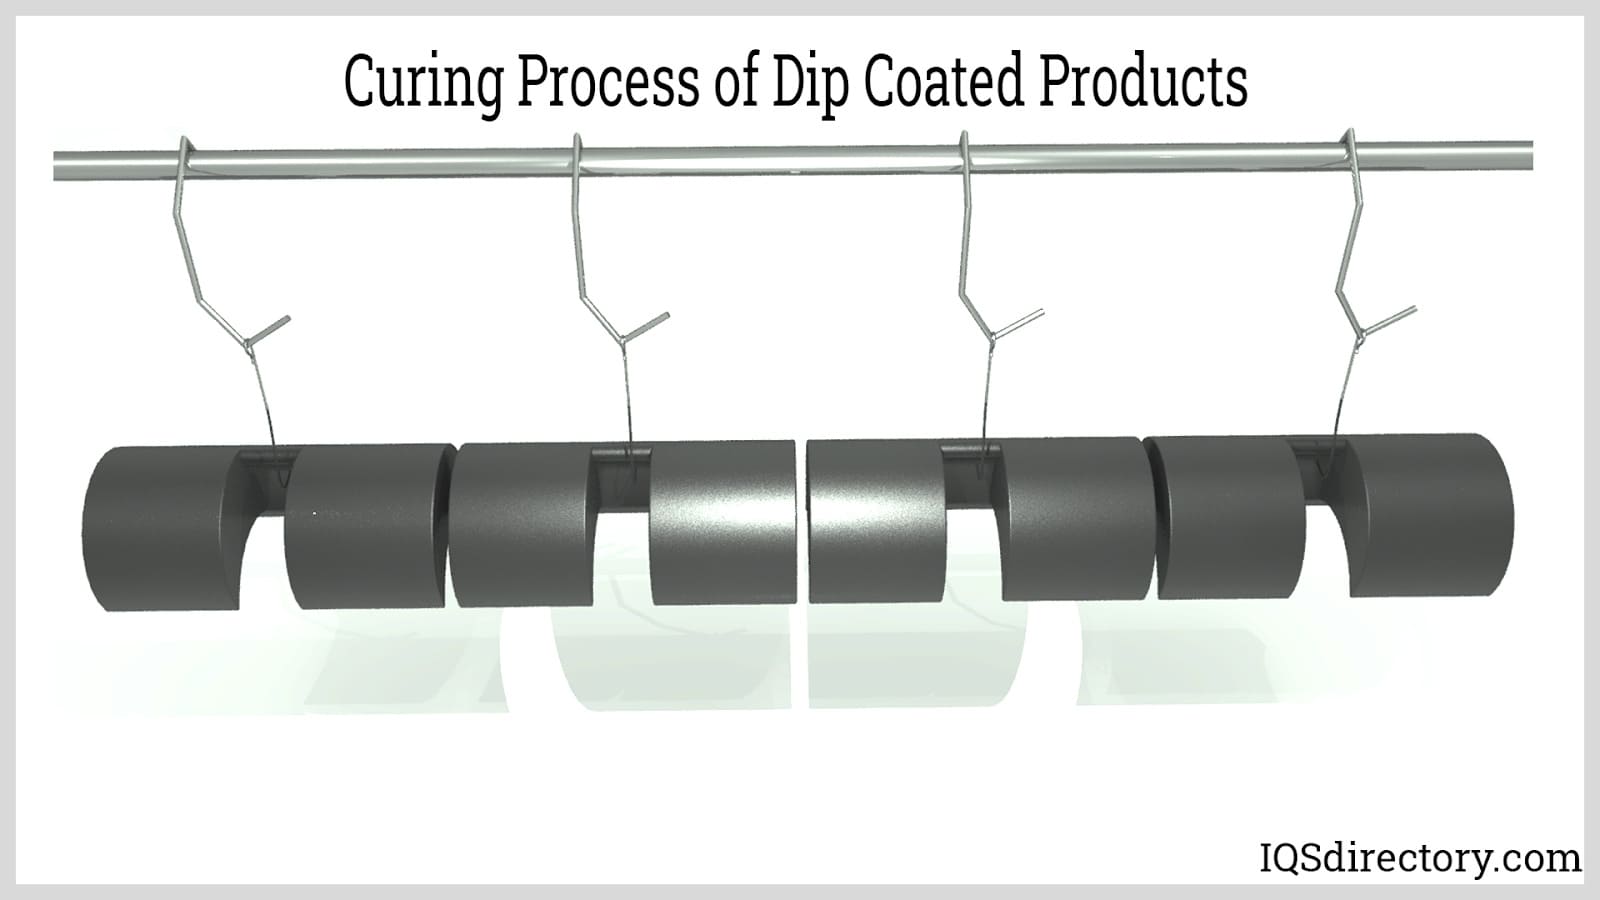 Curing Process of Dip Coated Products